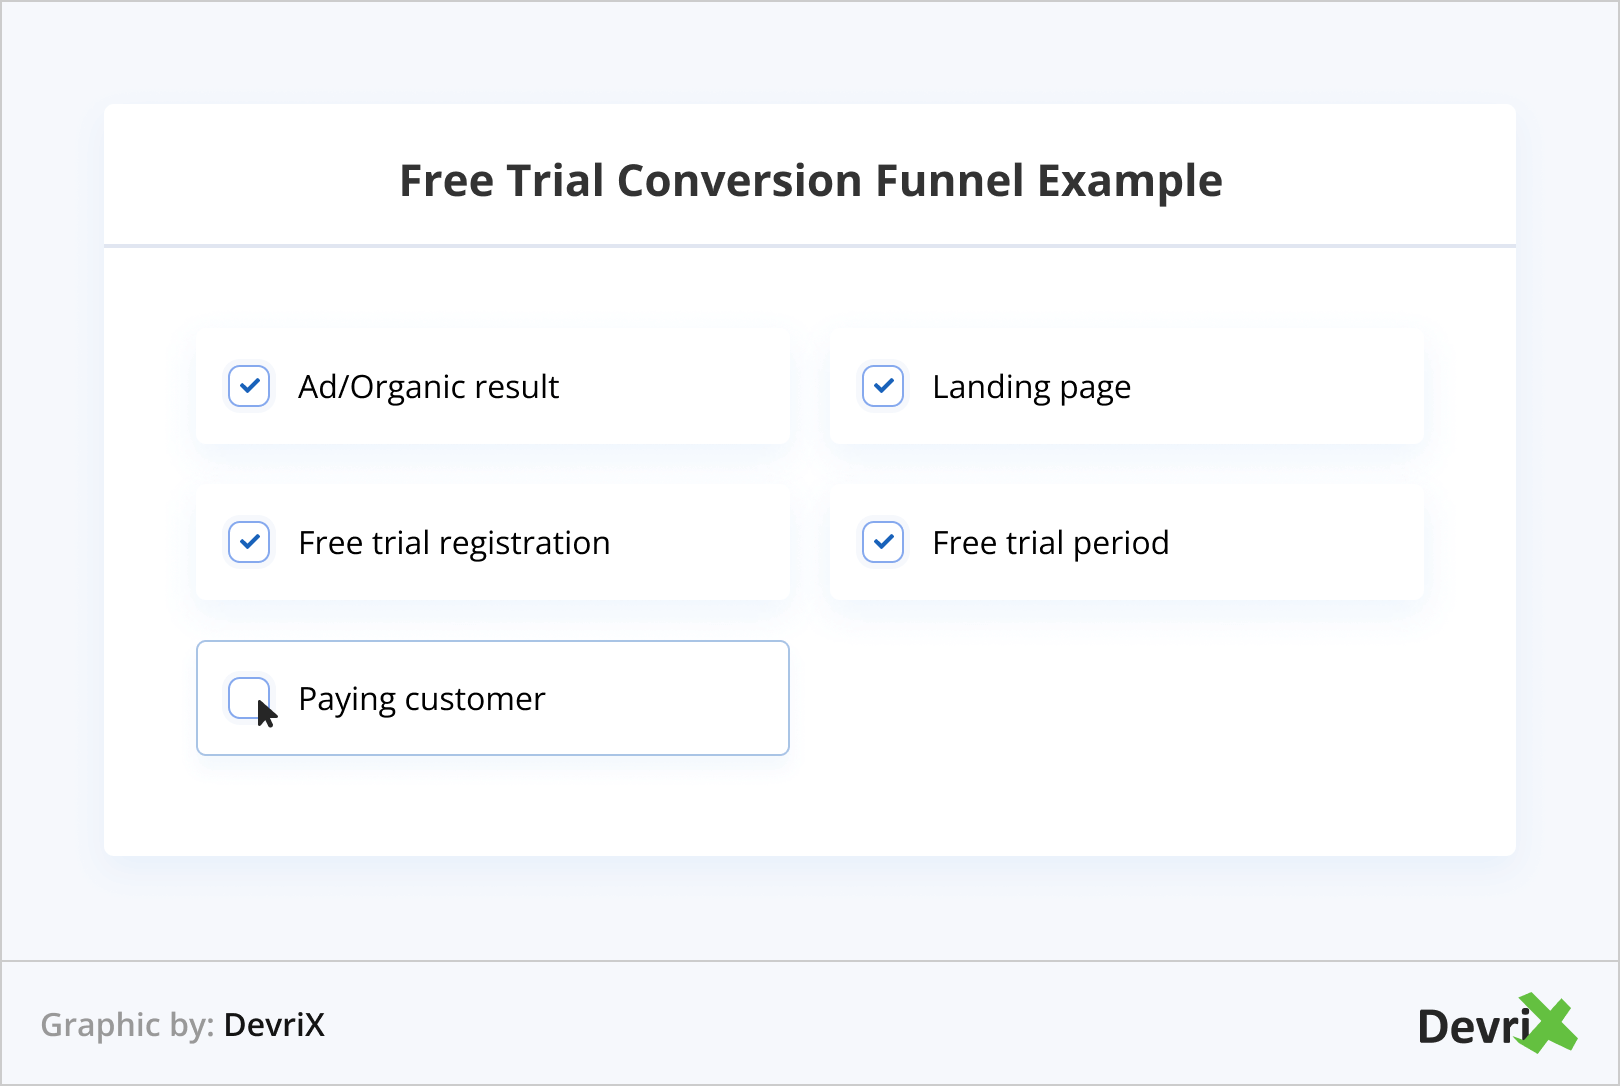 Free Trial Conversion Funnel Example